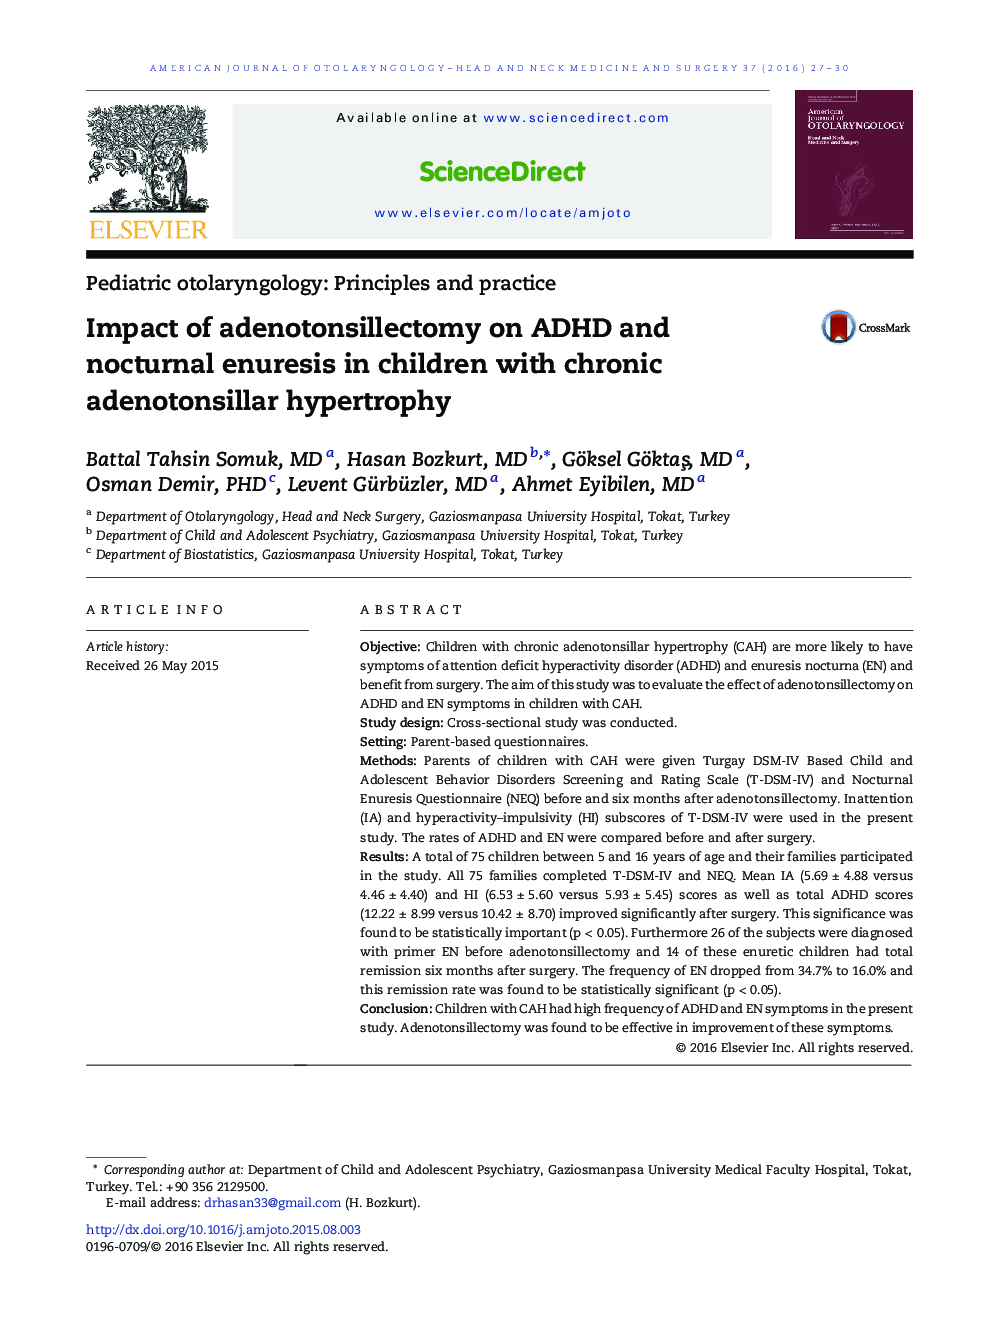 Impact of adenotonsillectomy on ADHD and nocturnal enuresis in children with chronic adenotonsillar hypertrophy